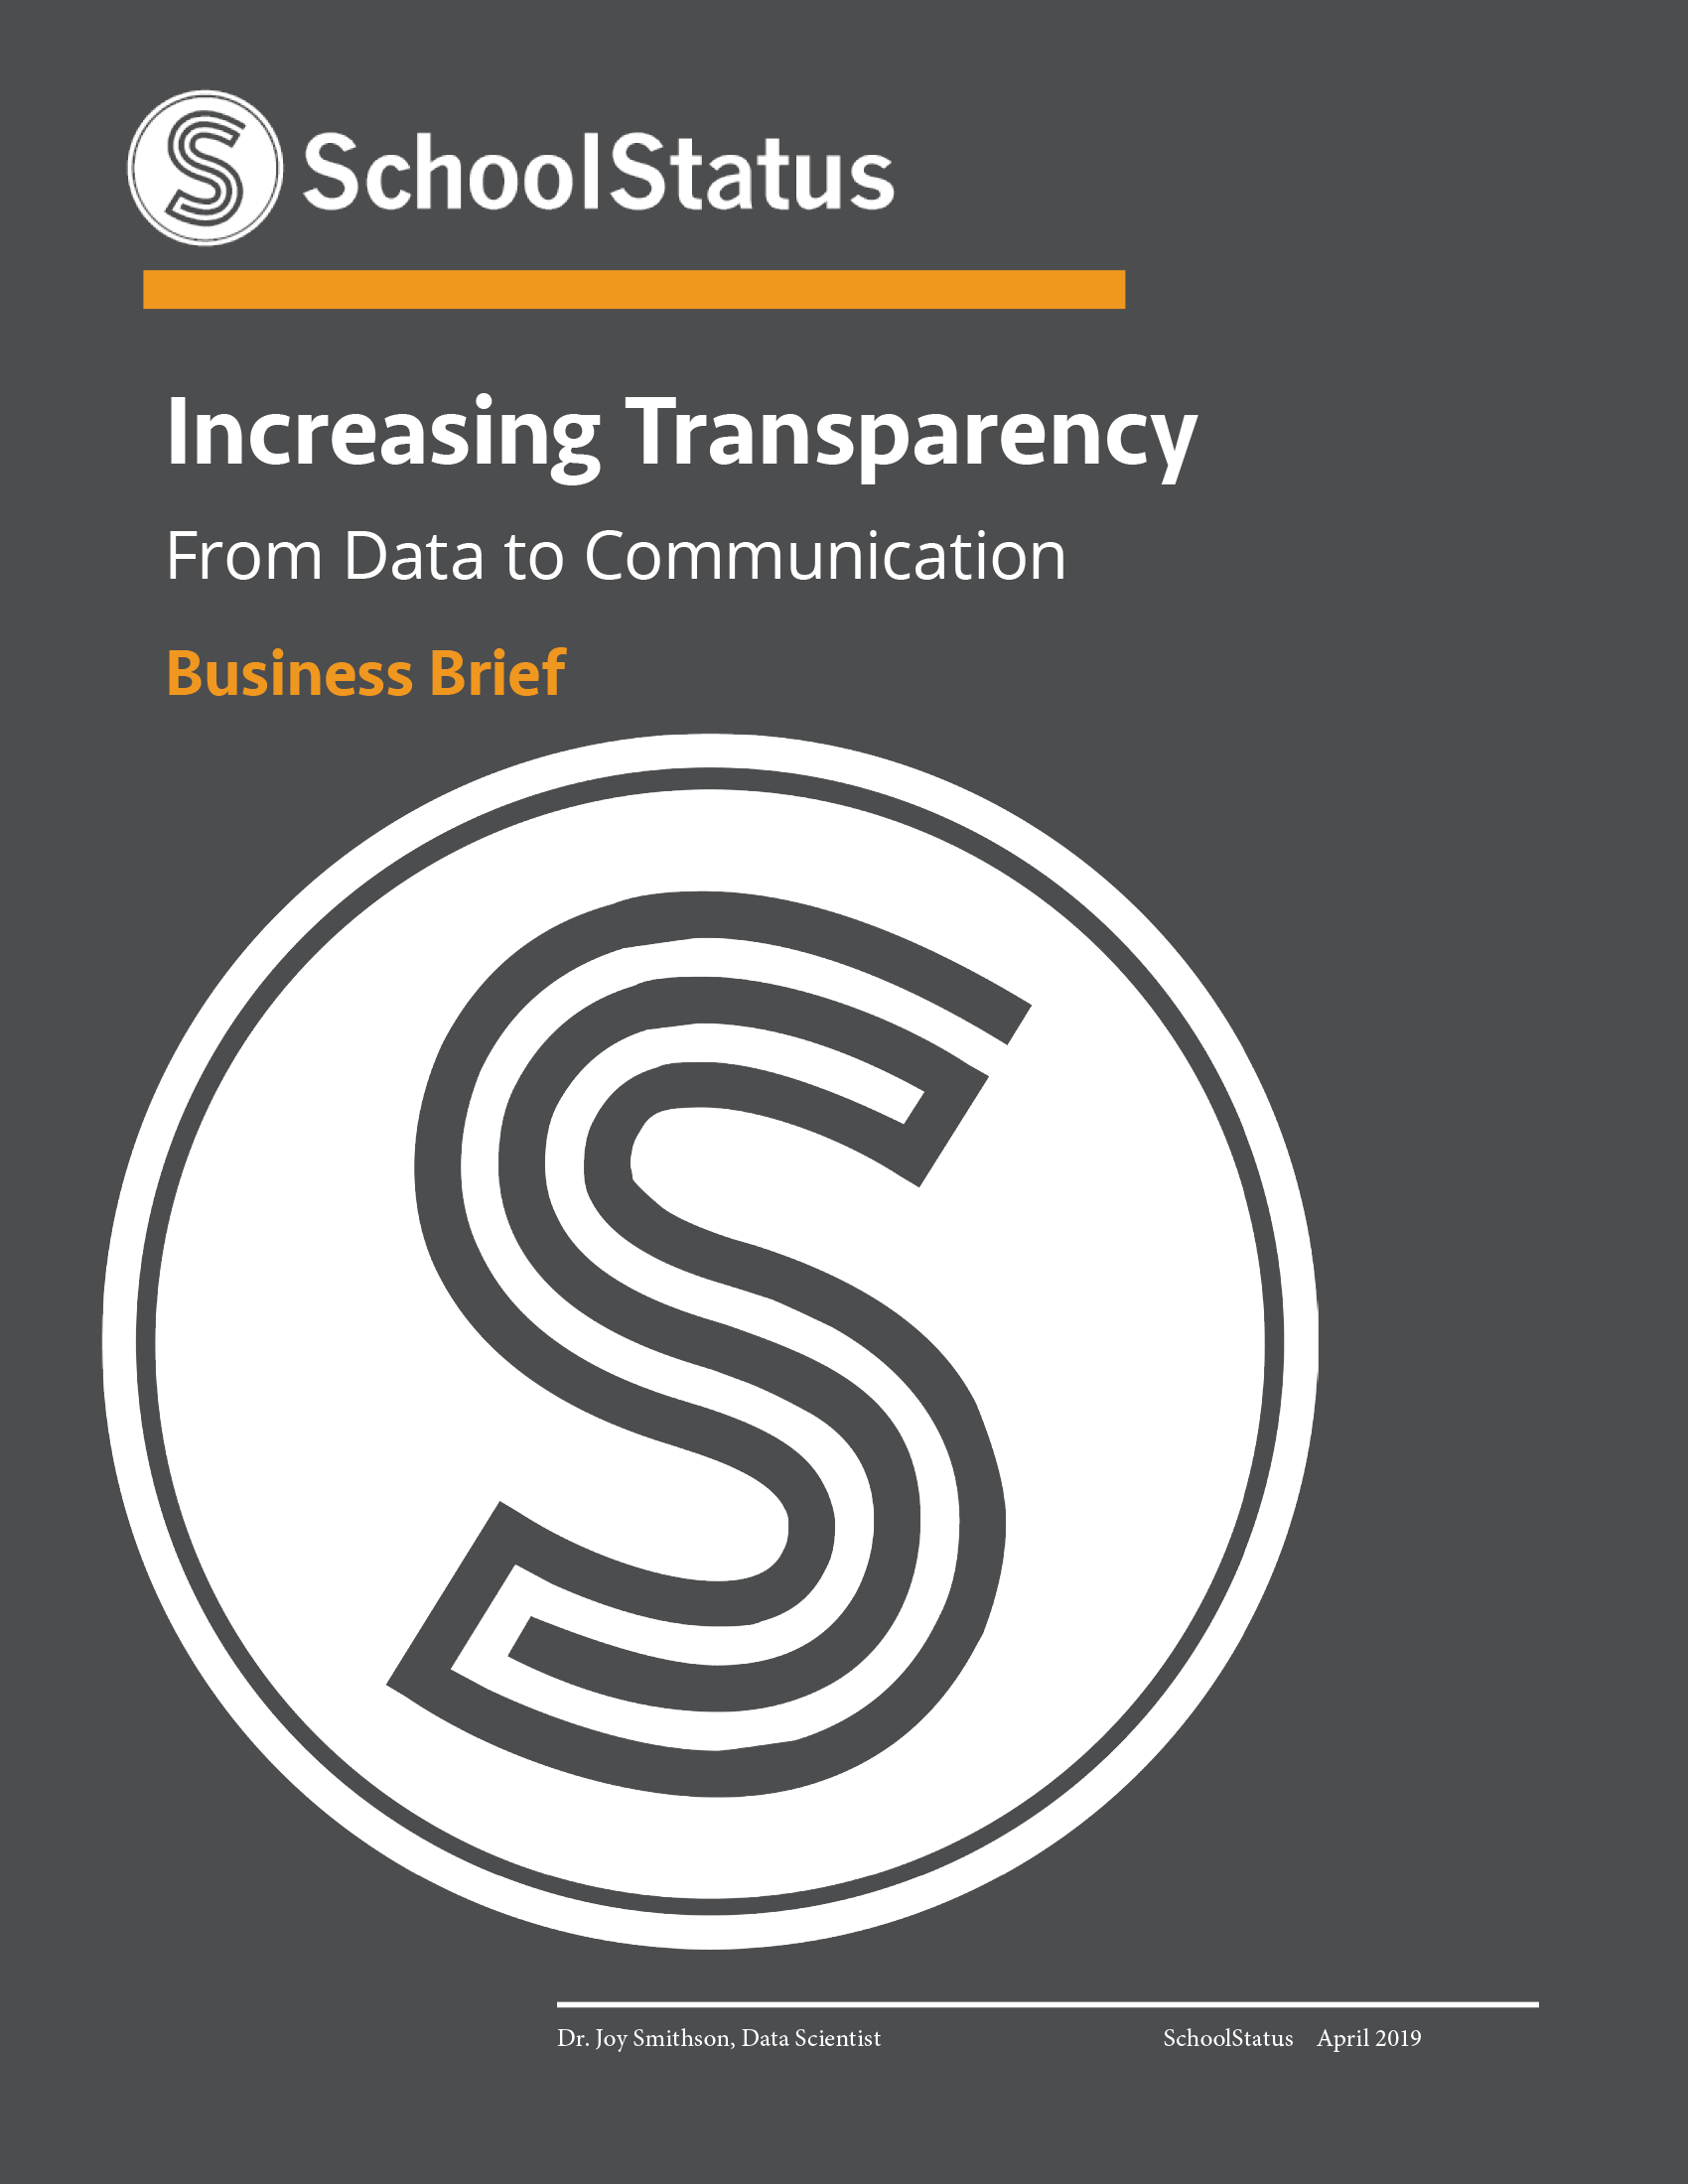 Data Access for Transparency